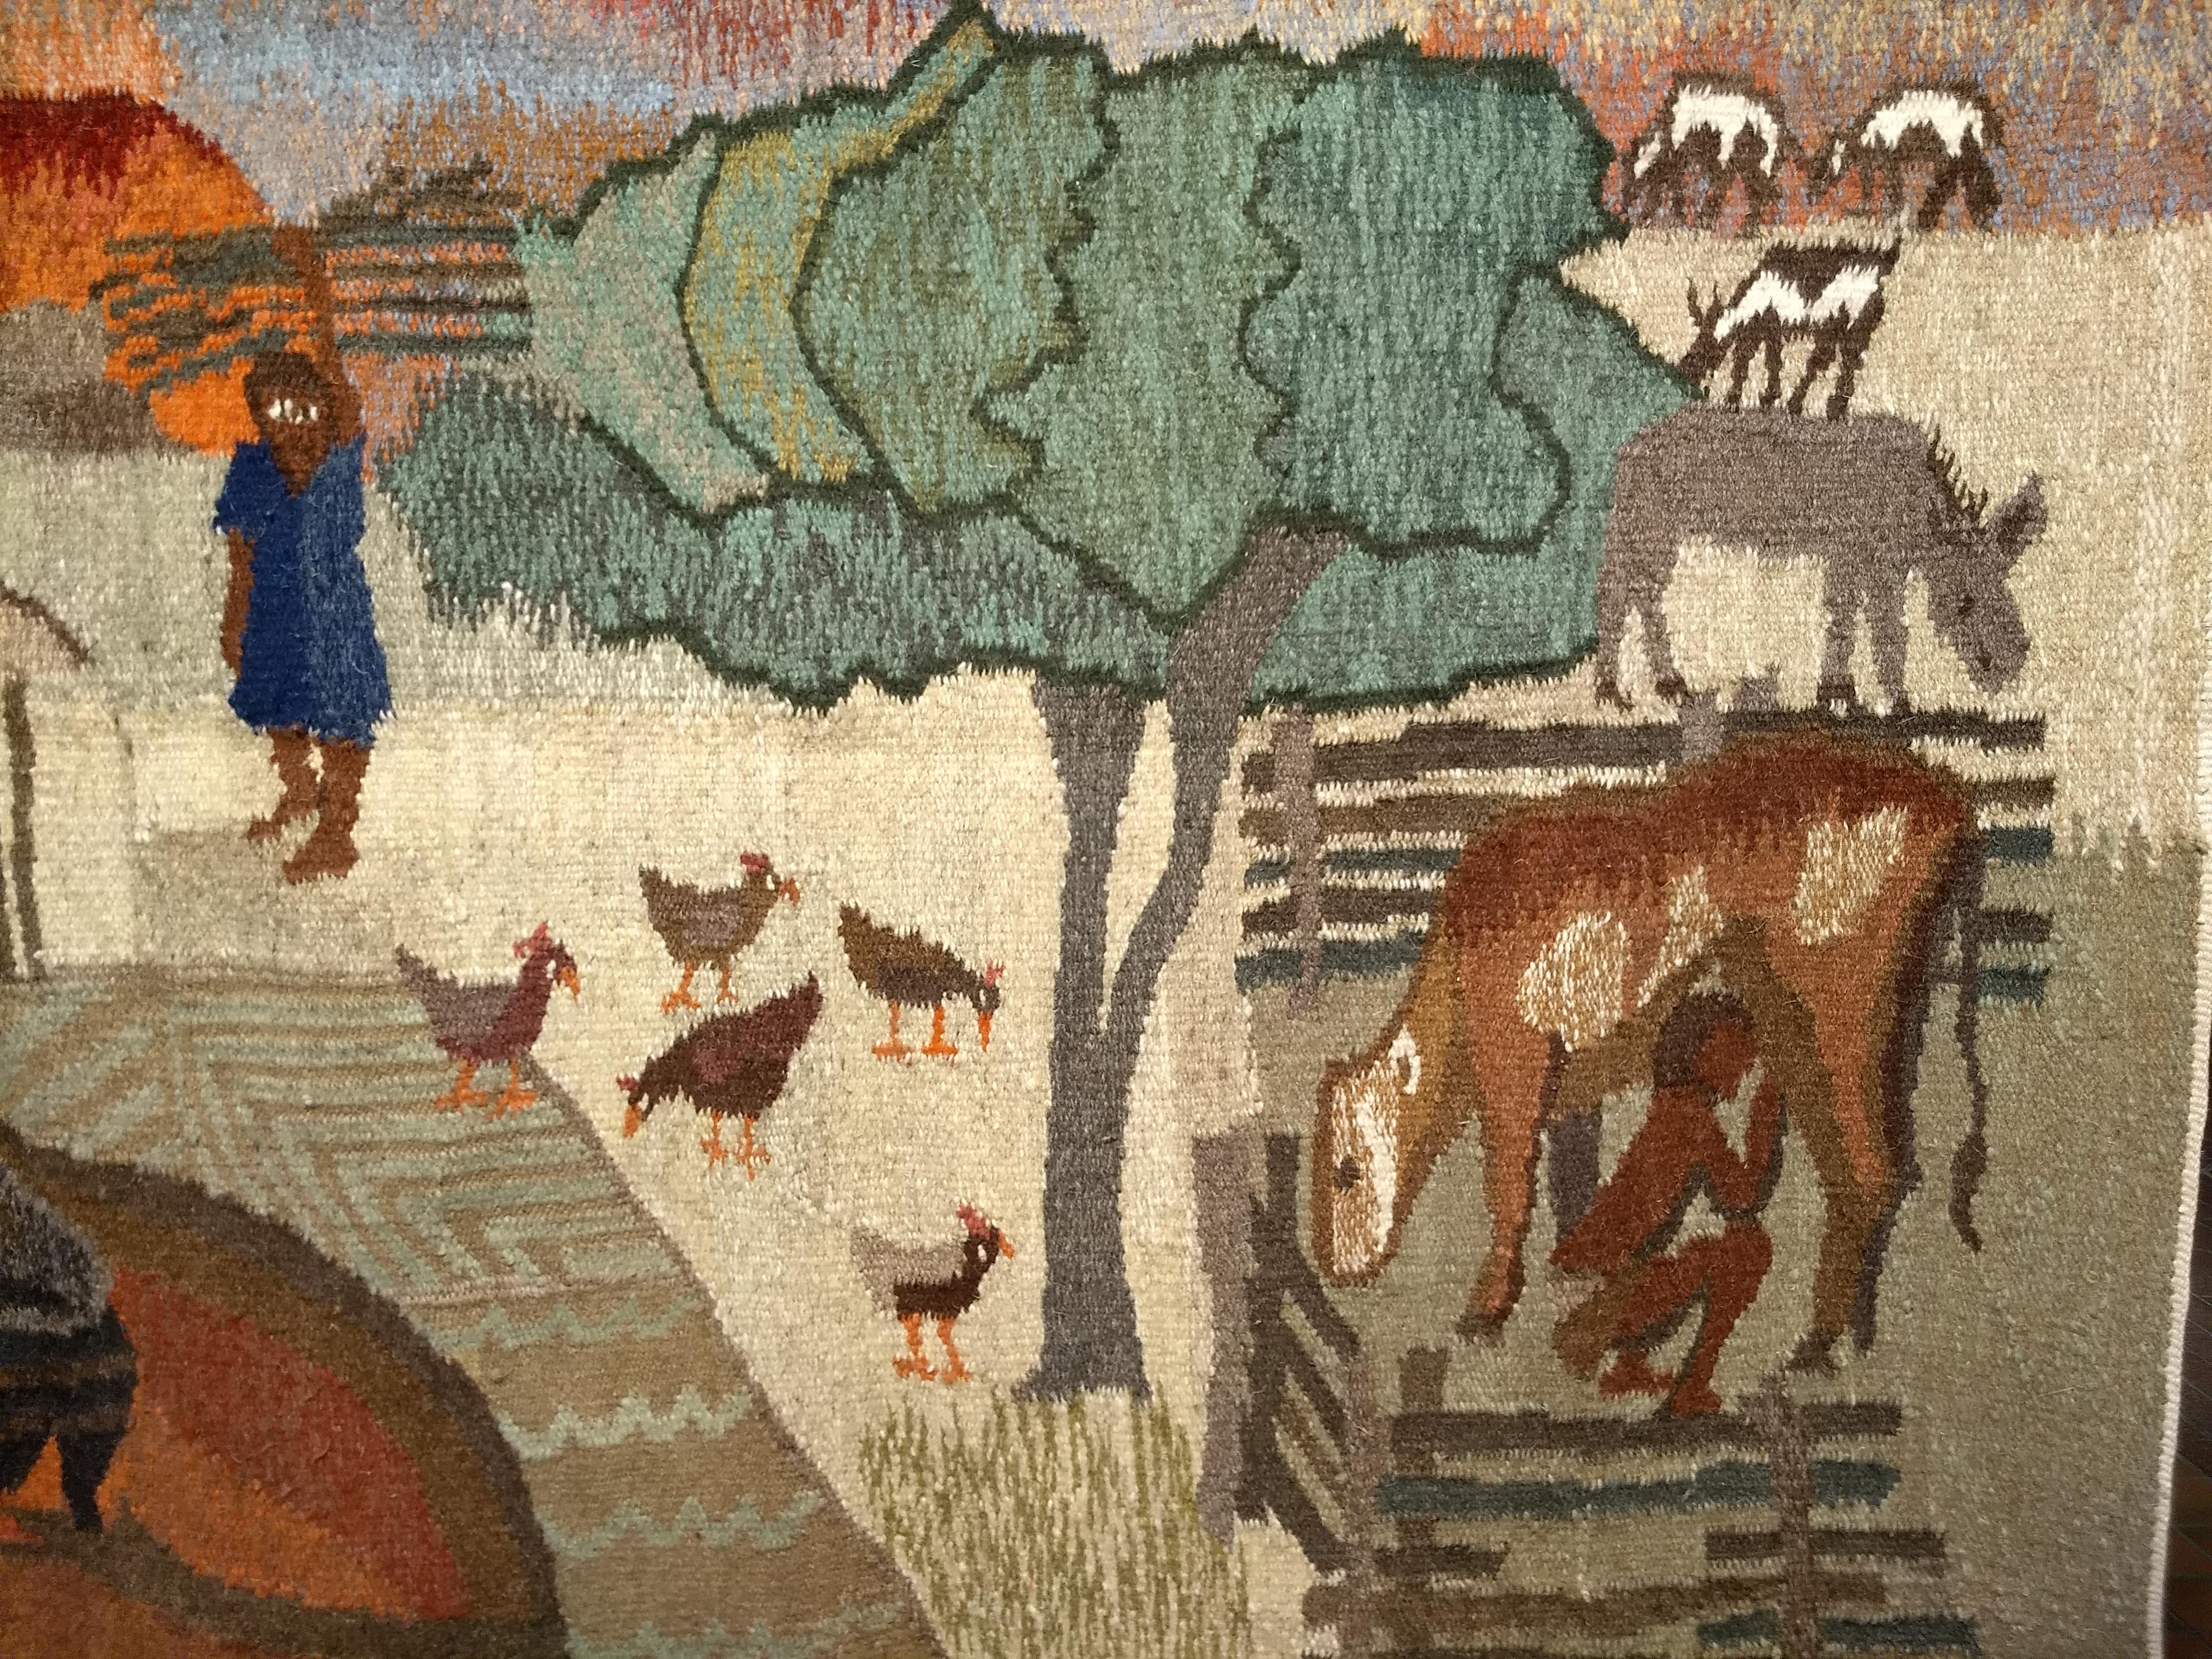 Vintage Hand Woven African Tapestry Depicting Life Scenes Around a Village For Sale 4